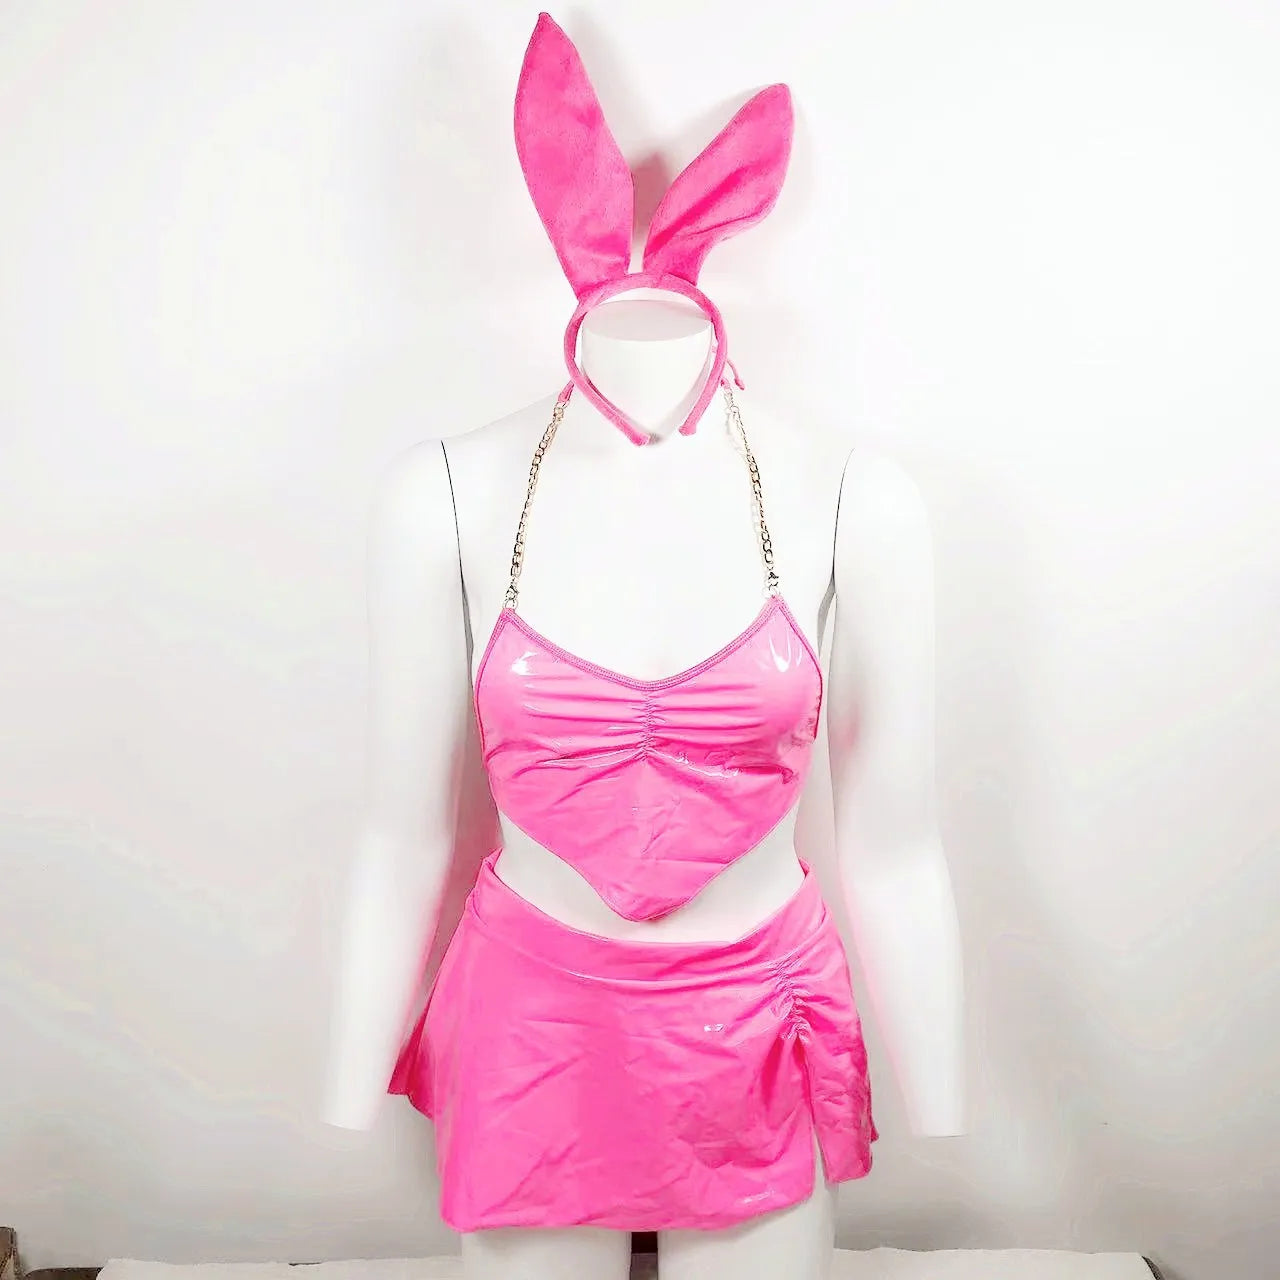 Ellolace Neon Pink Latex Lingerie Set: 3-Piece Bunny Costume for Women - Sexy PVC Nightclub Outfit